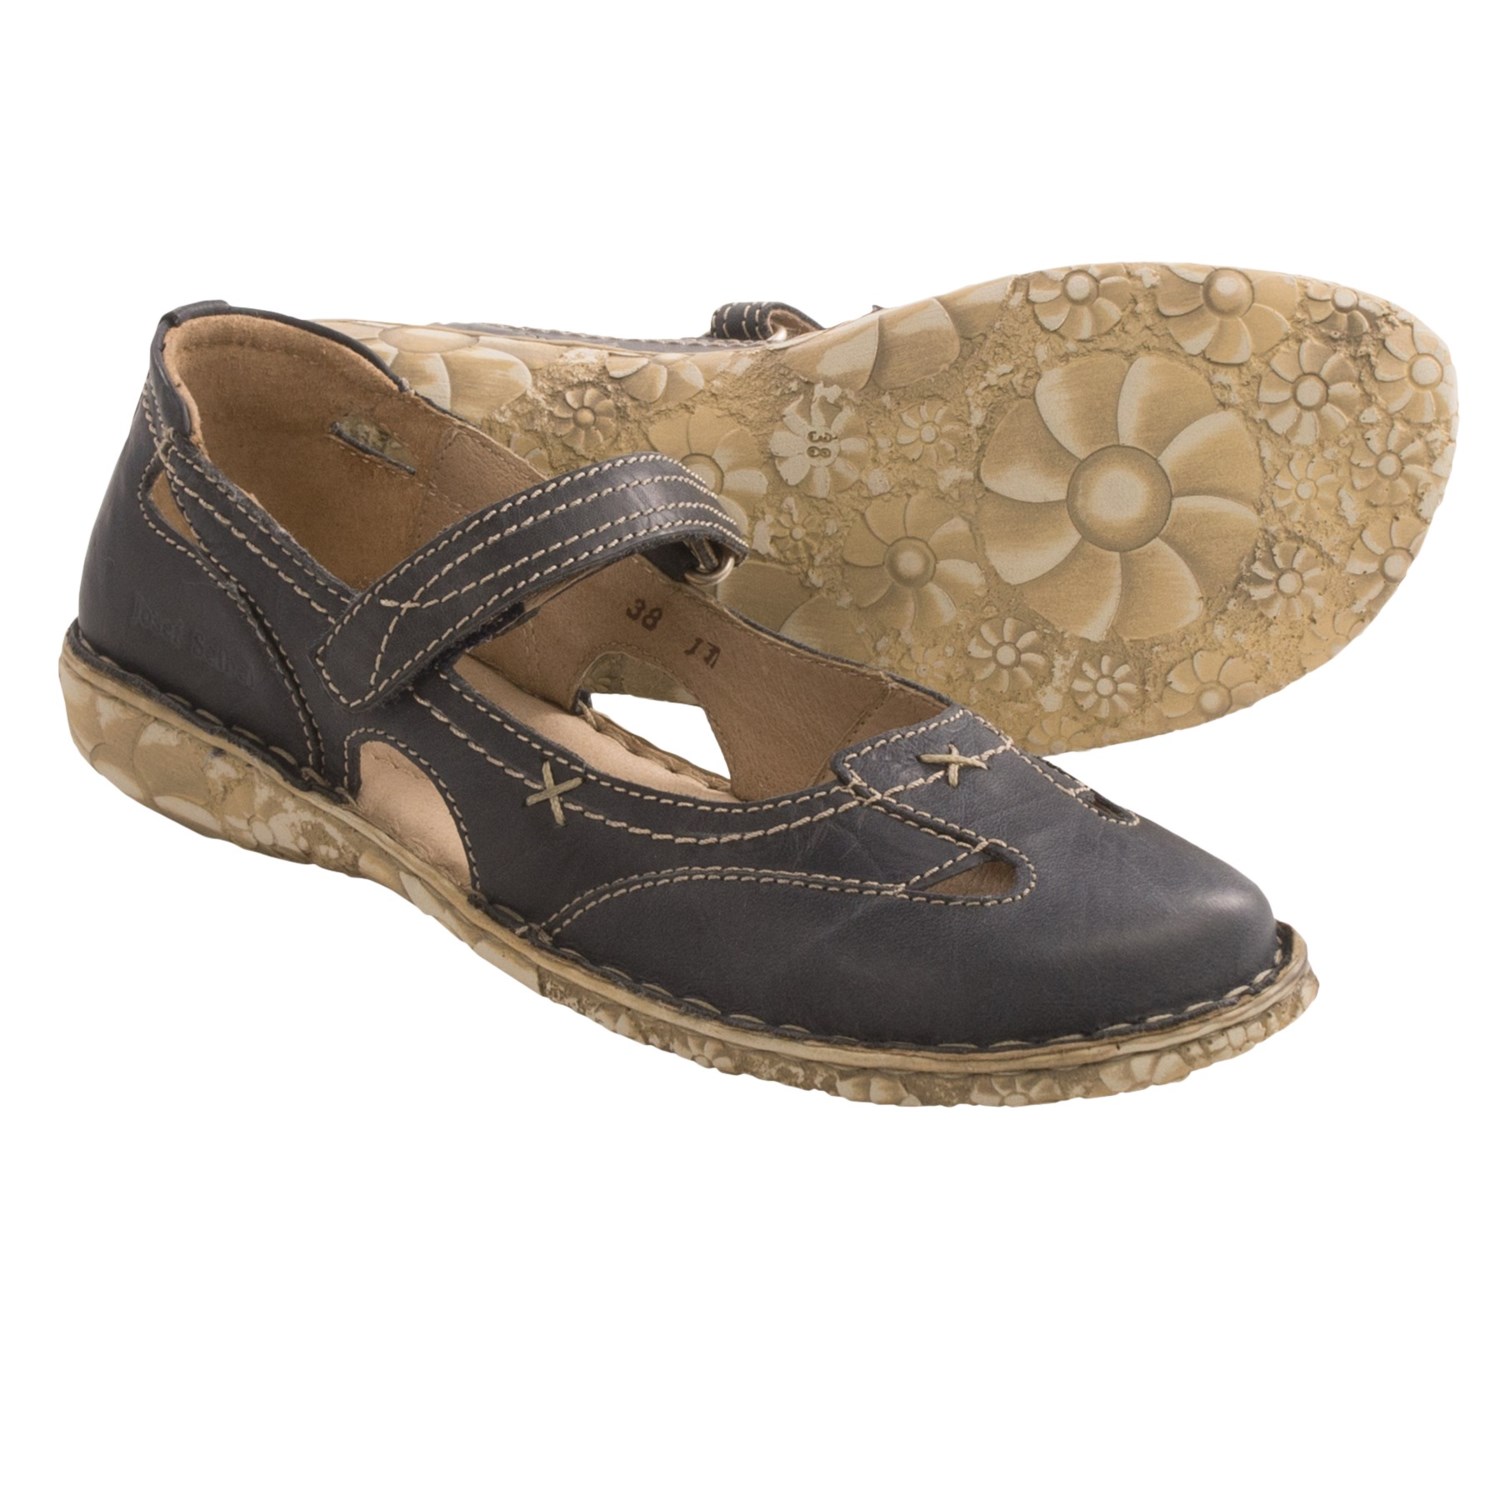 Josef Seibel Ingrid Mary Jane Shoes - Leather (For Women) in River